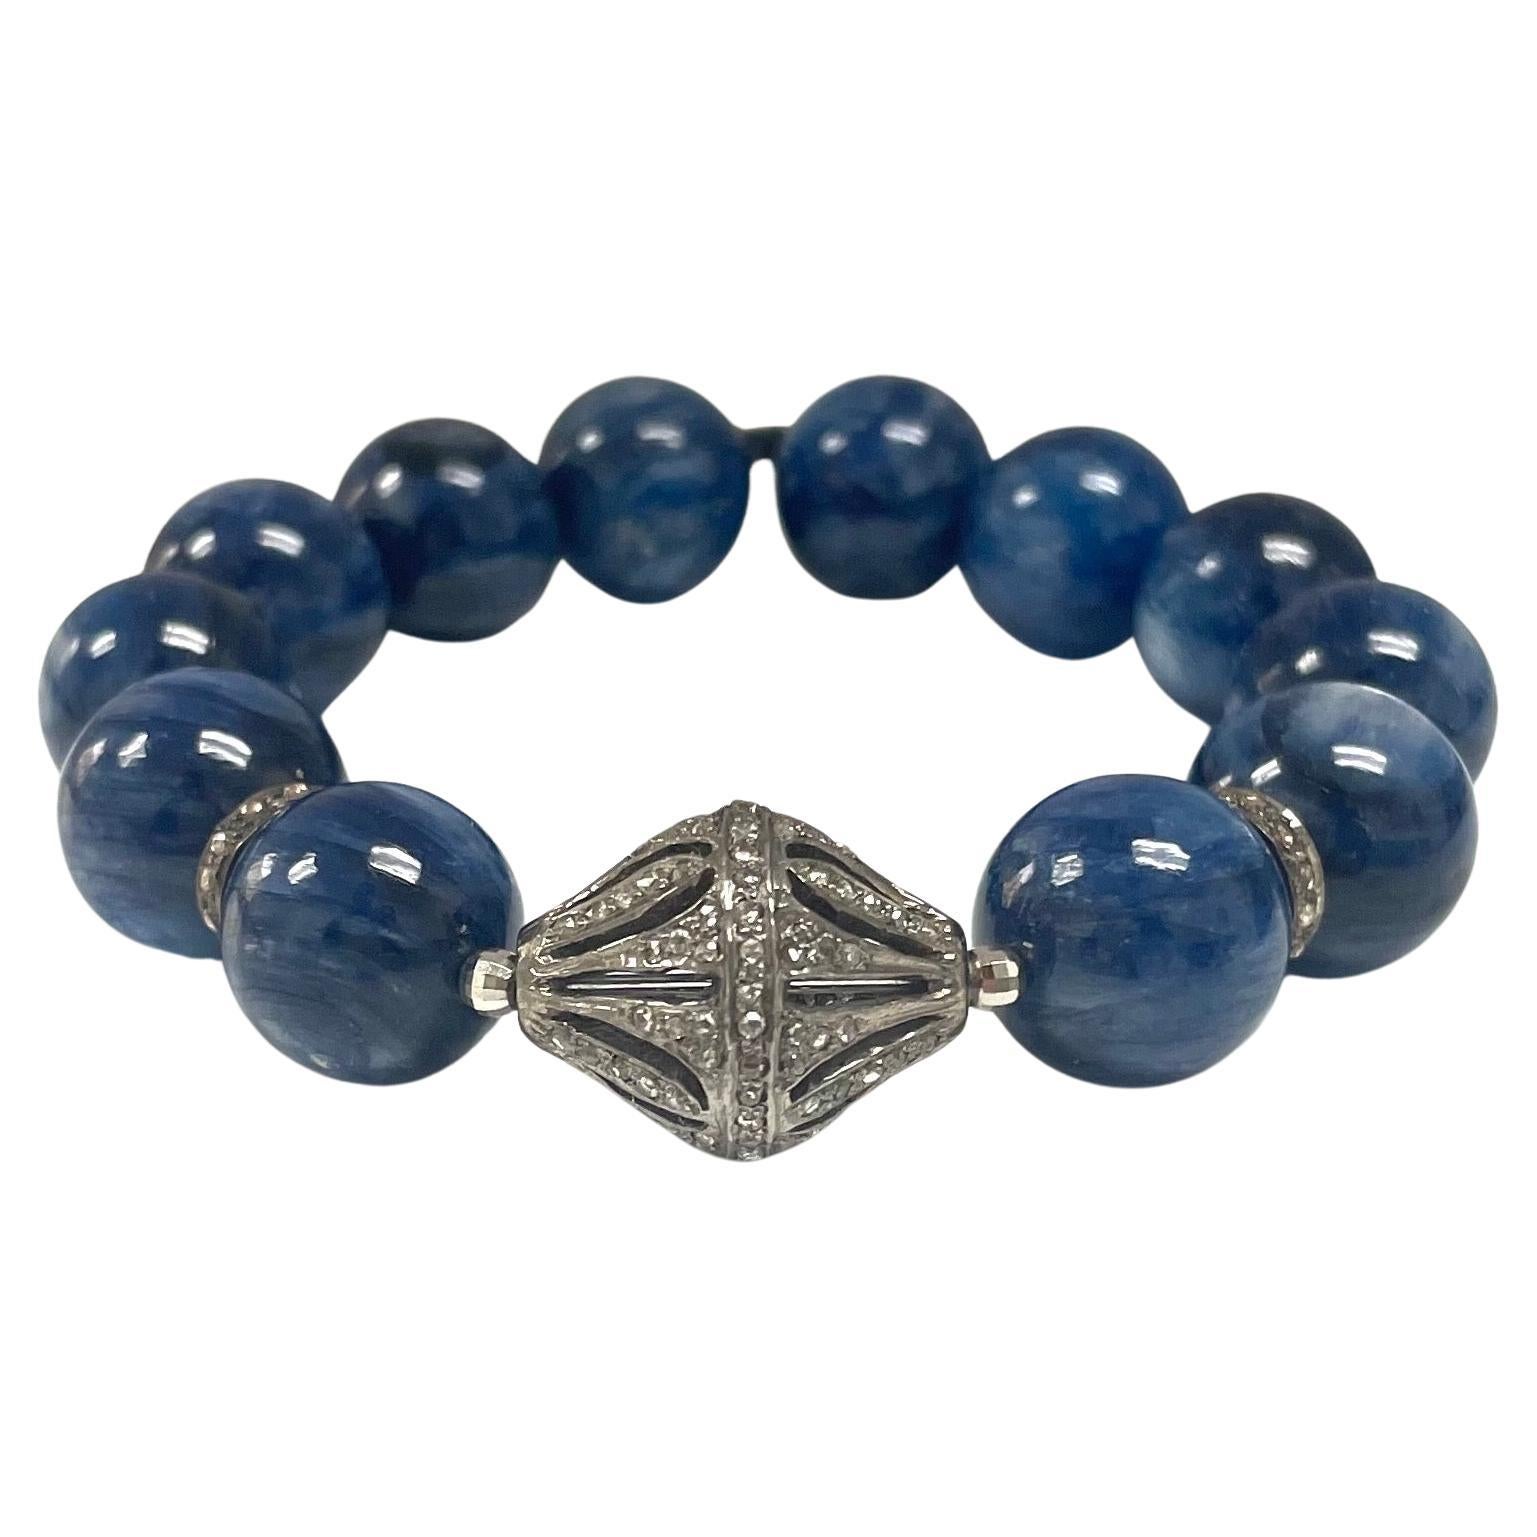 Description
Superior quality blue Kyanite stretchy bracelet, accented with a large 15x20 mm pave diamond centerpiece and rondelles. 
Item # B1101
Wear two together to make a statement, check out item# B1102, sold separately.
Also, see matching